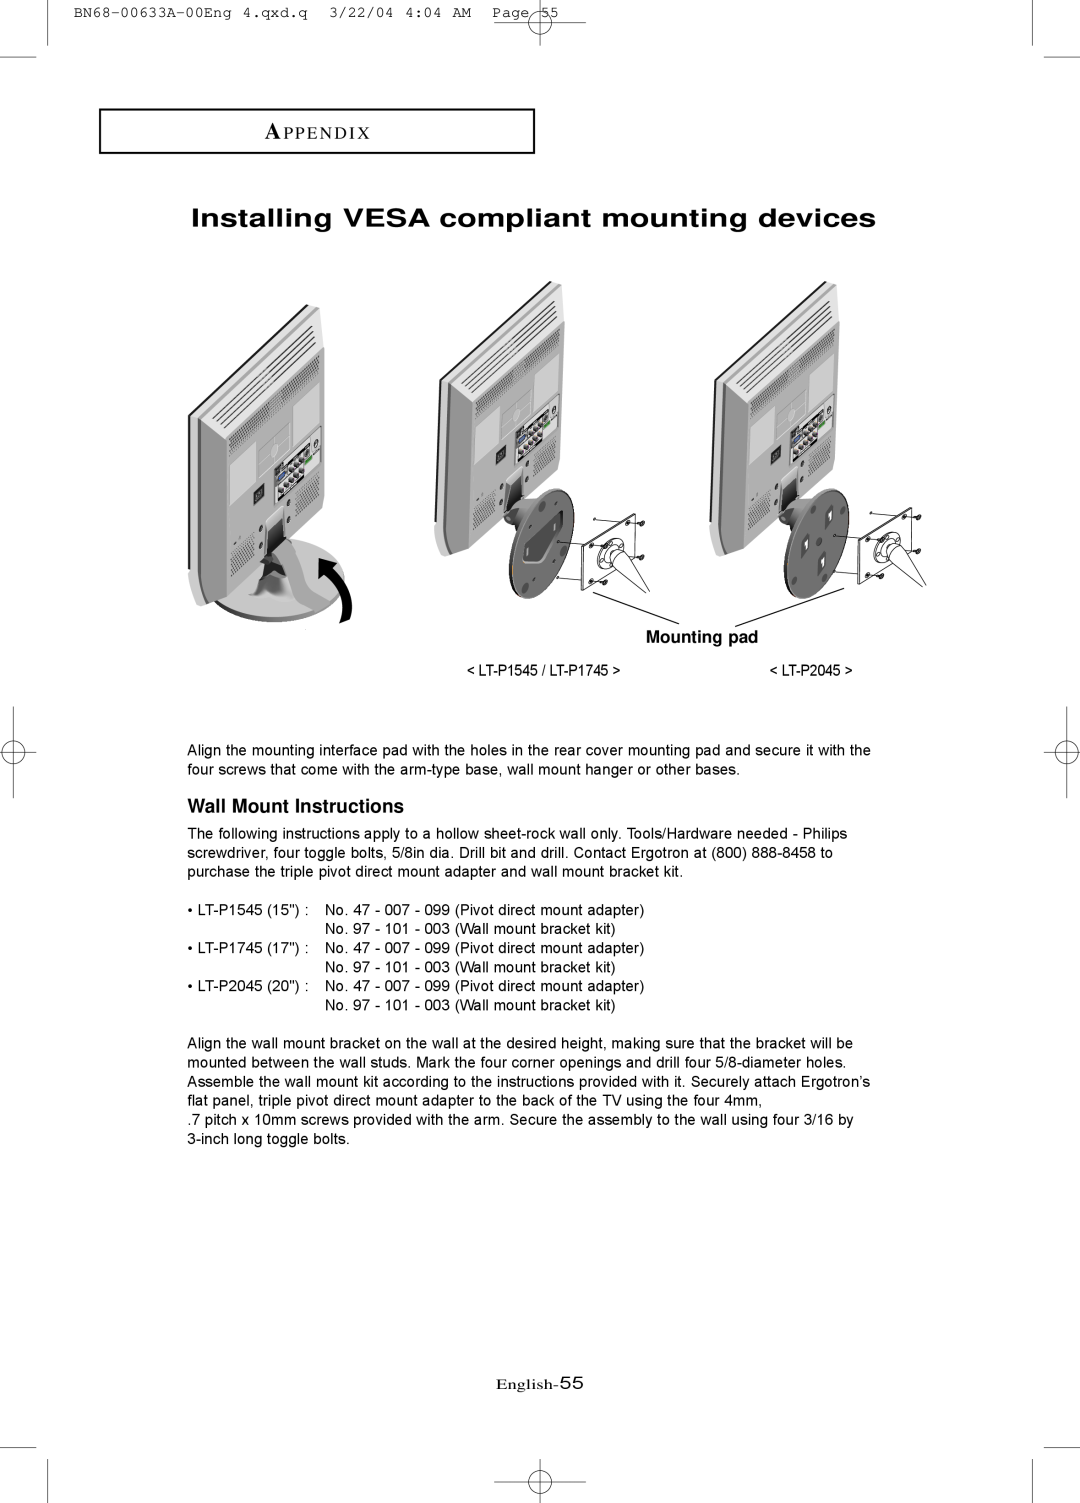 Samsung LT-P 1545 manual Installing VESA compliant mounting devices, Wall Mount Instructions, A P P E N D I, Mounting pad 